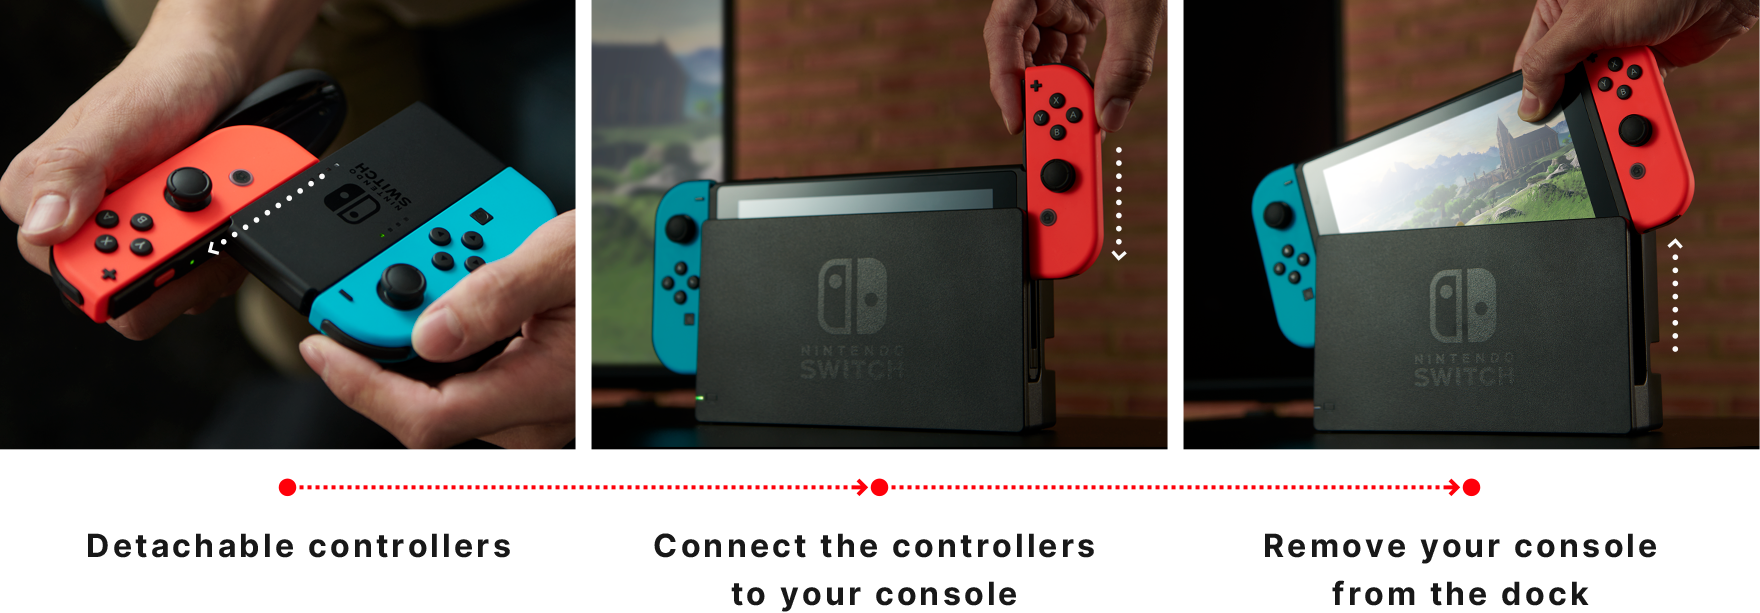 Detachable controllers / Connect the controllers to your console / Remove your console from the dock